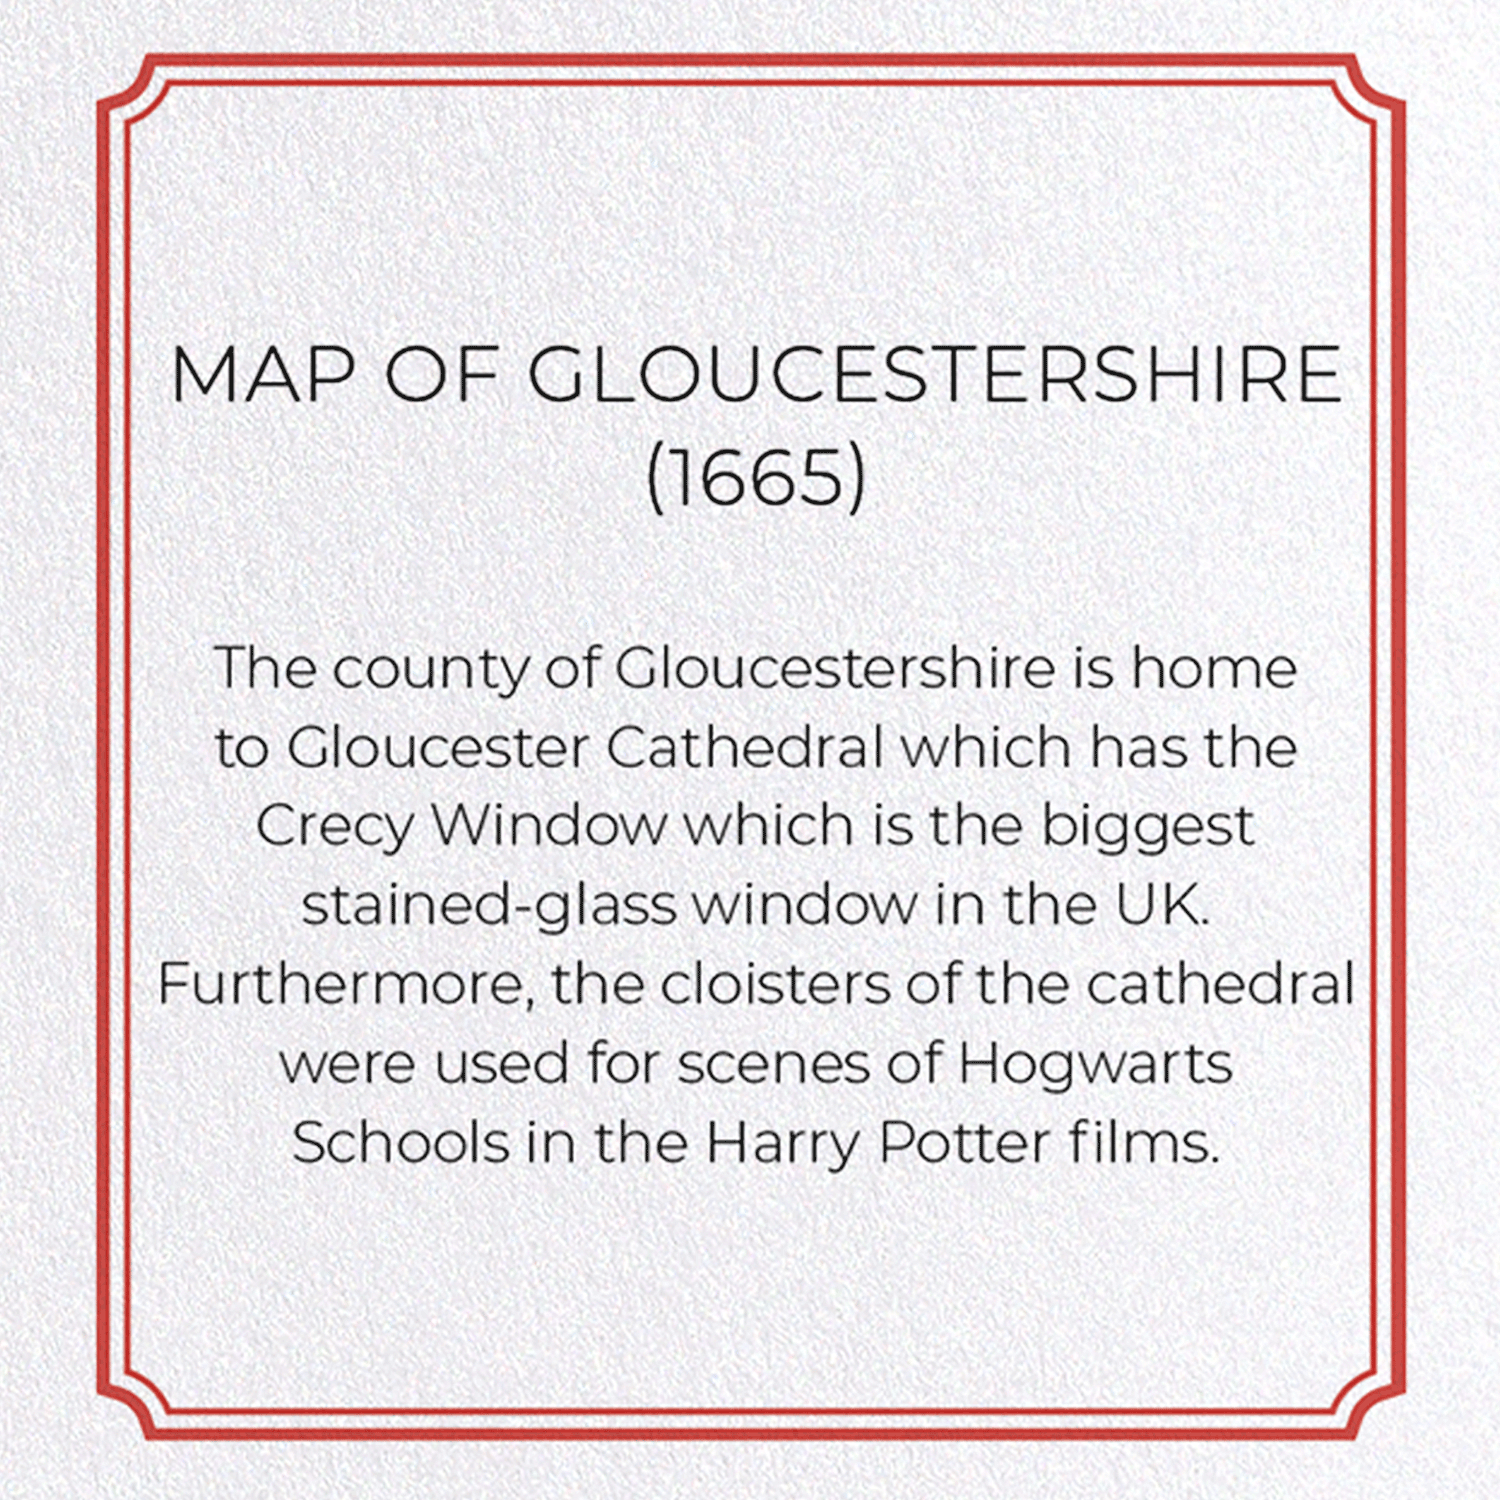 MAP OF GLOUCESTERSHIRE (1665)